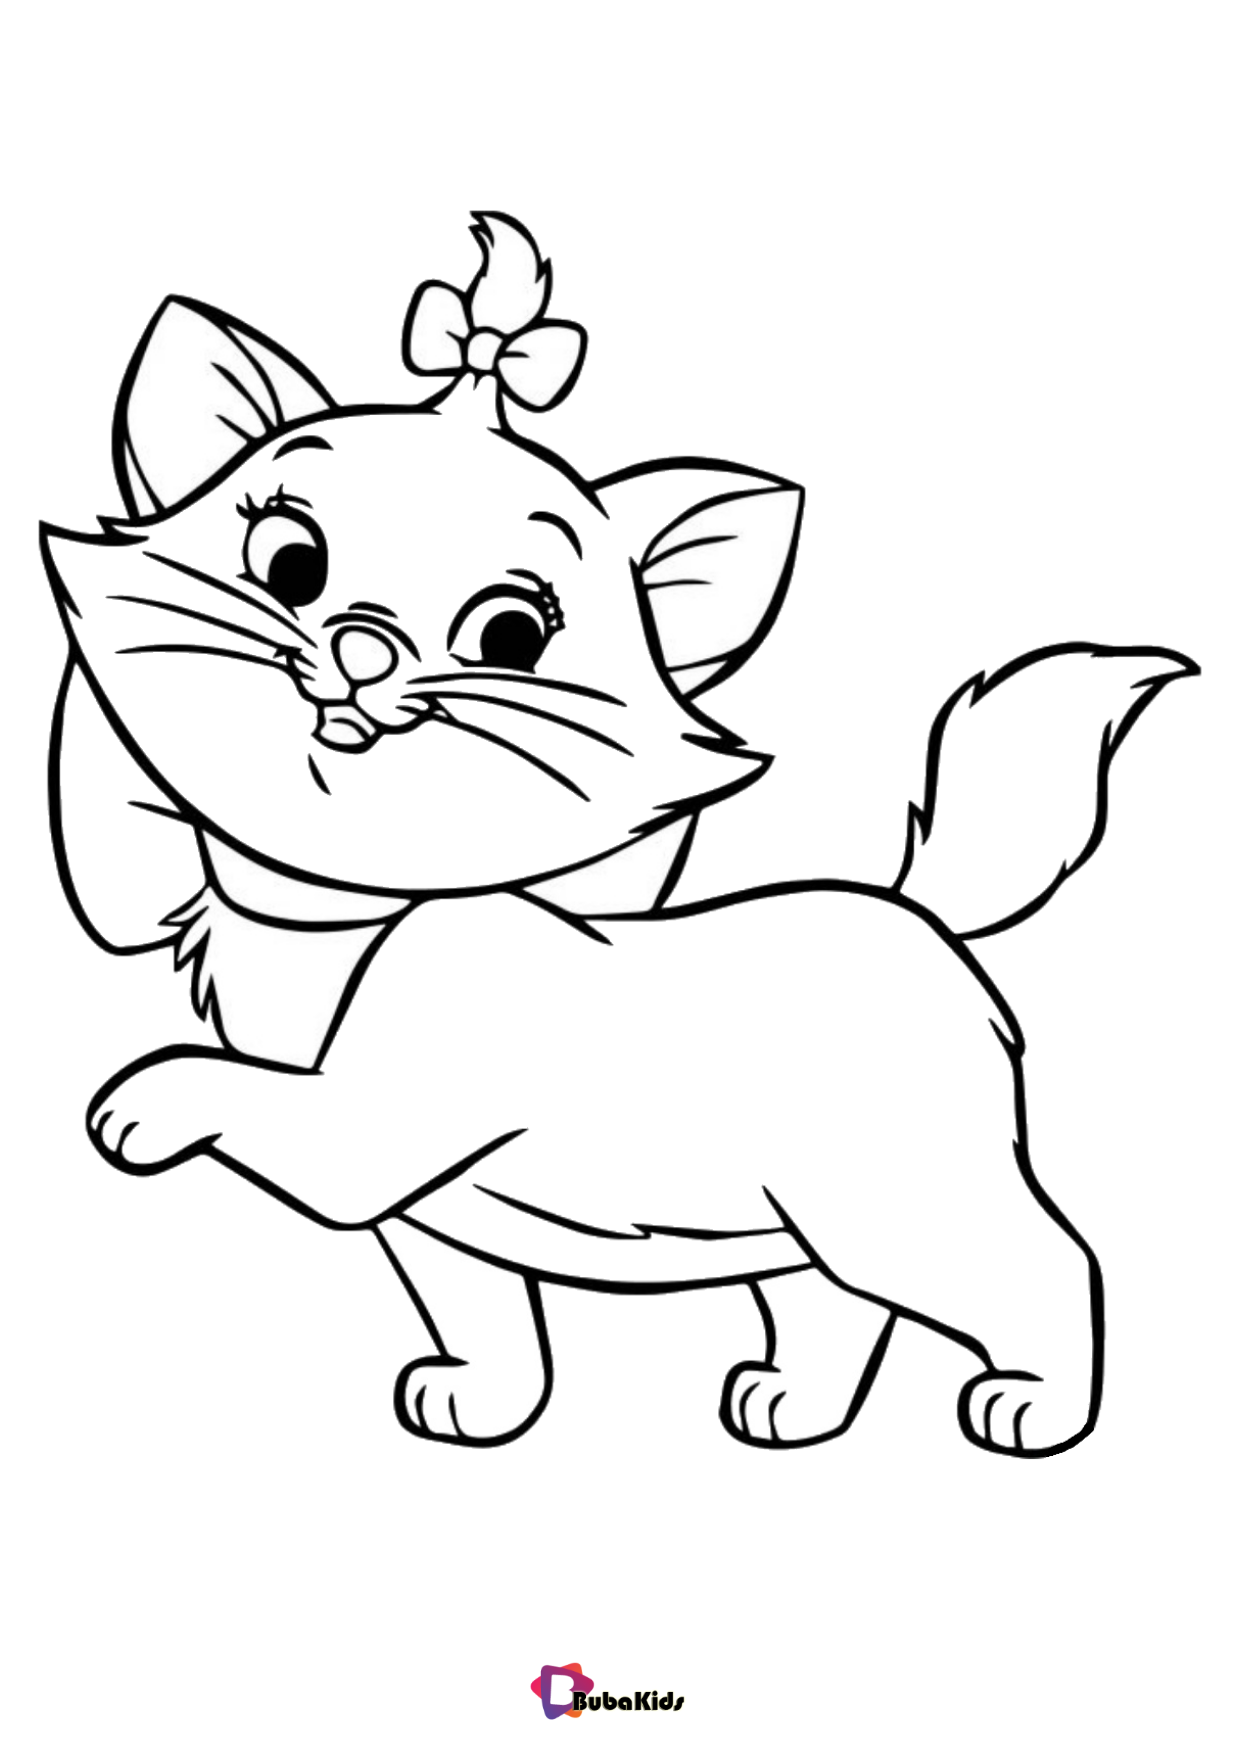 Cut lovely cat coloring page Wallpaper